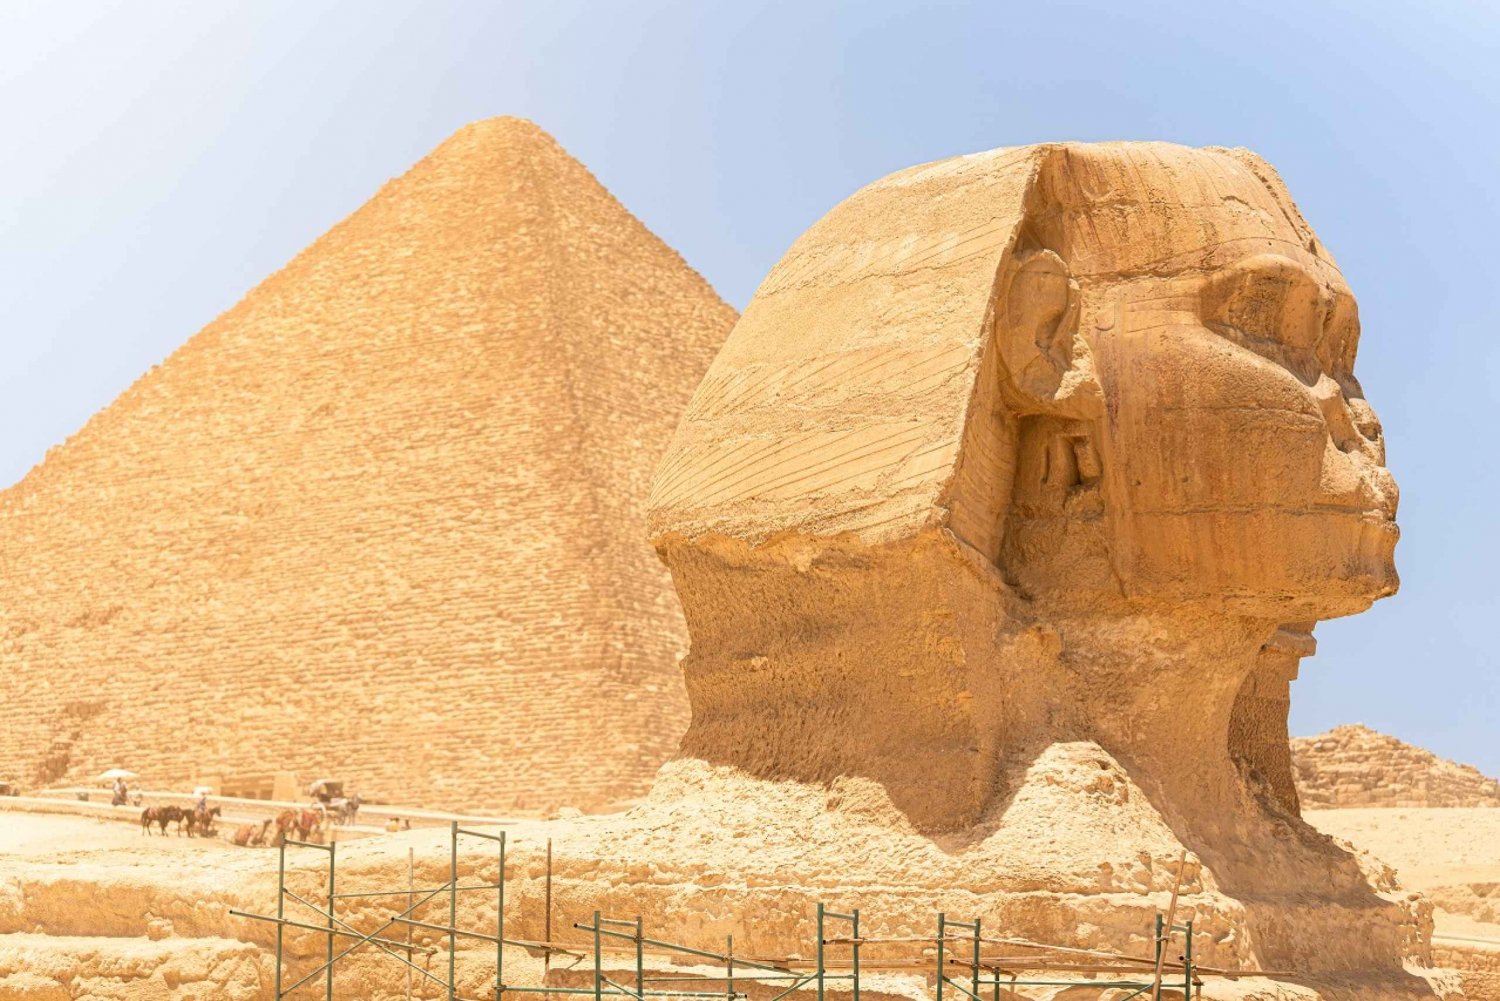 From Marsa Alam: Giza Pyramids & Museum Private Day Tour